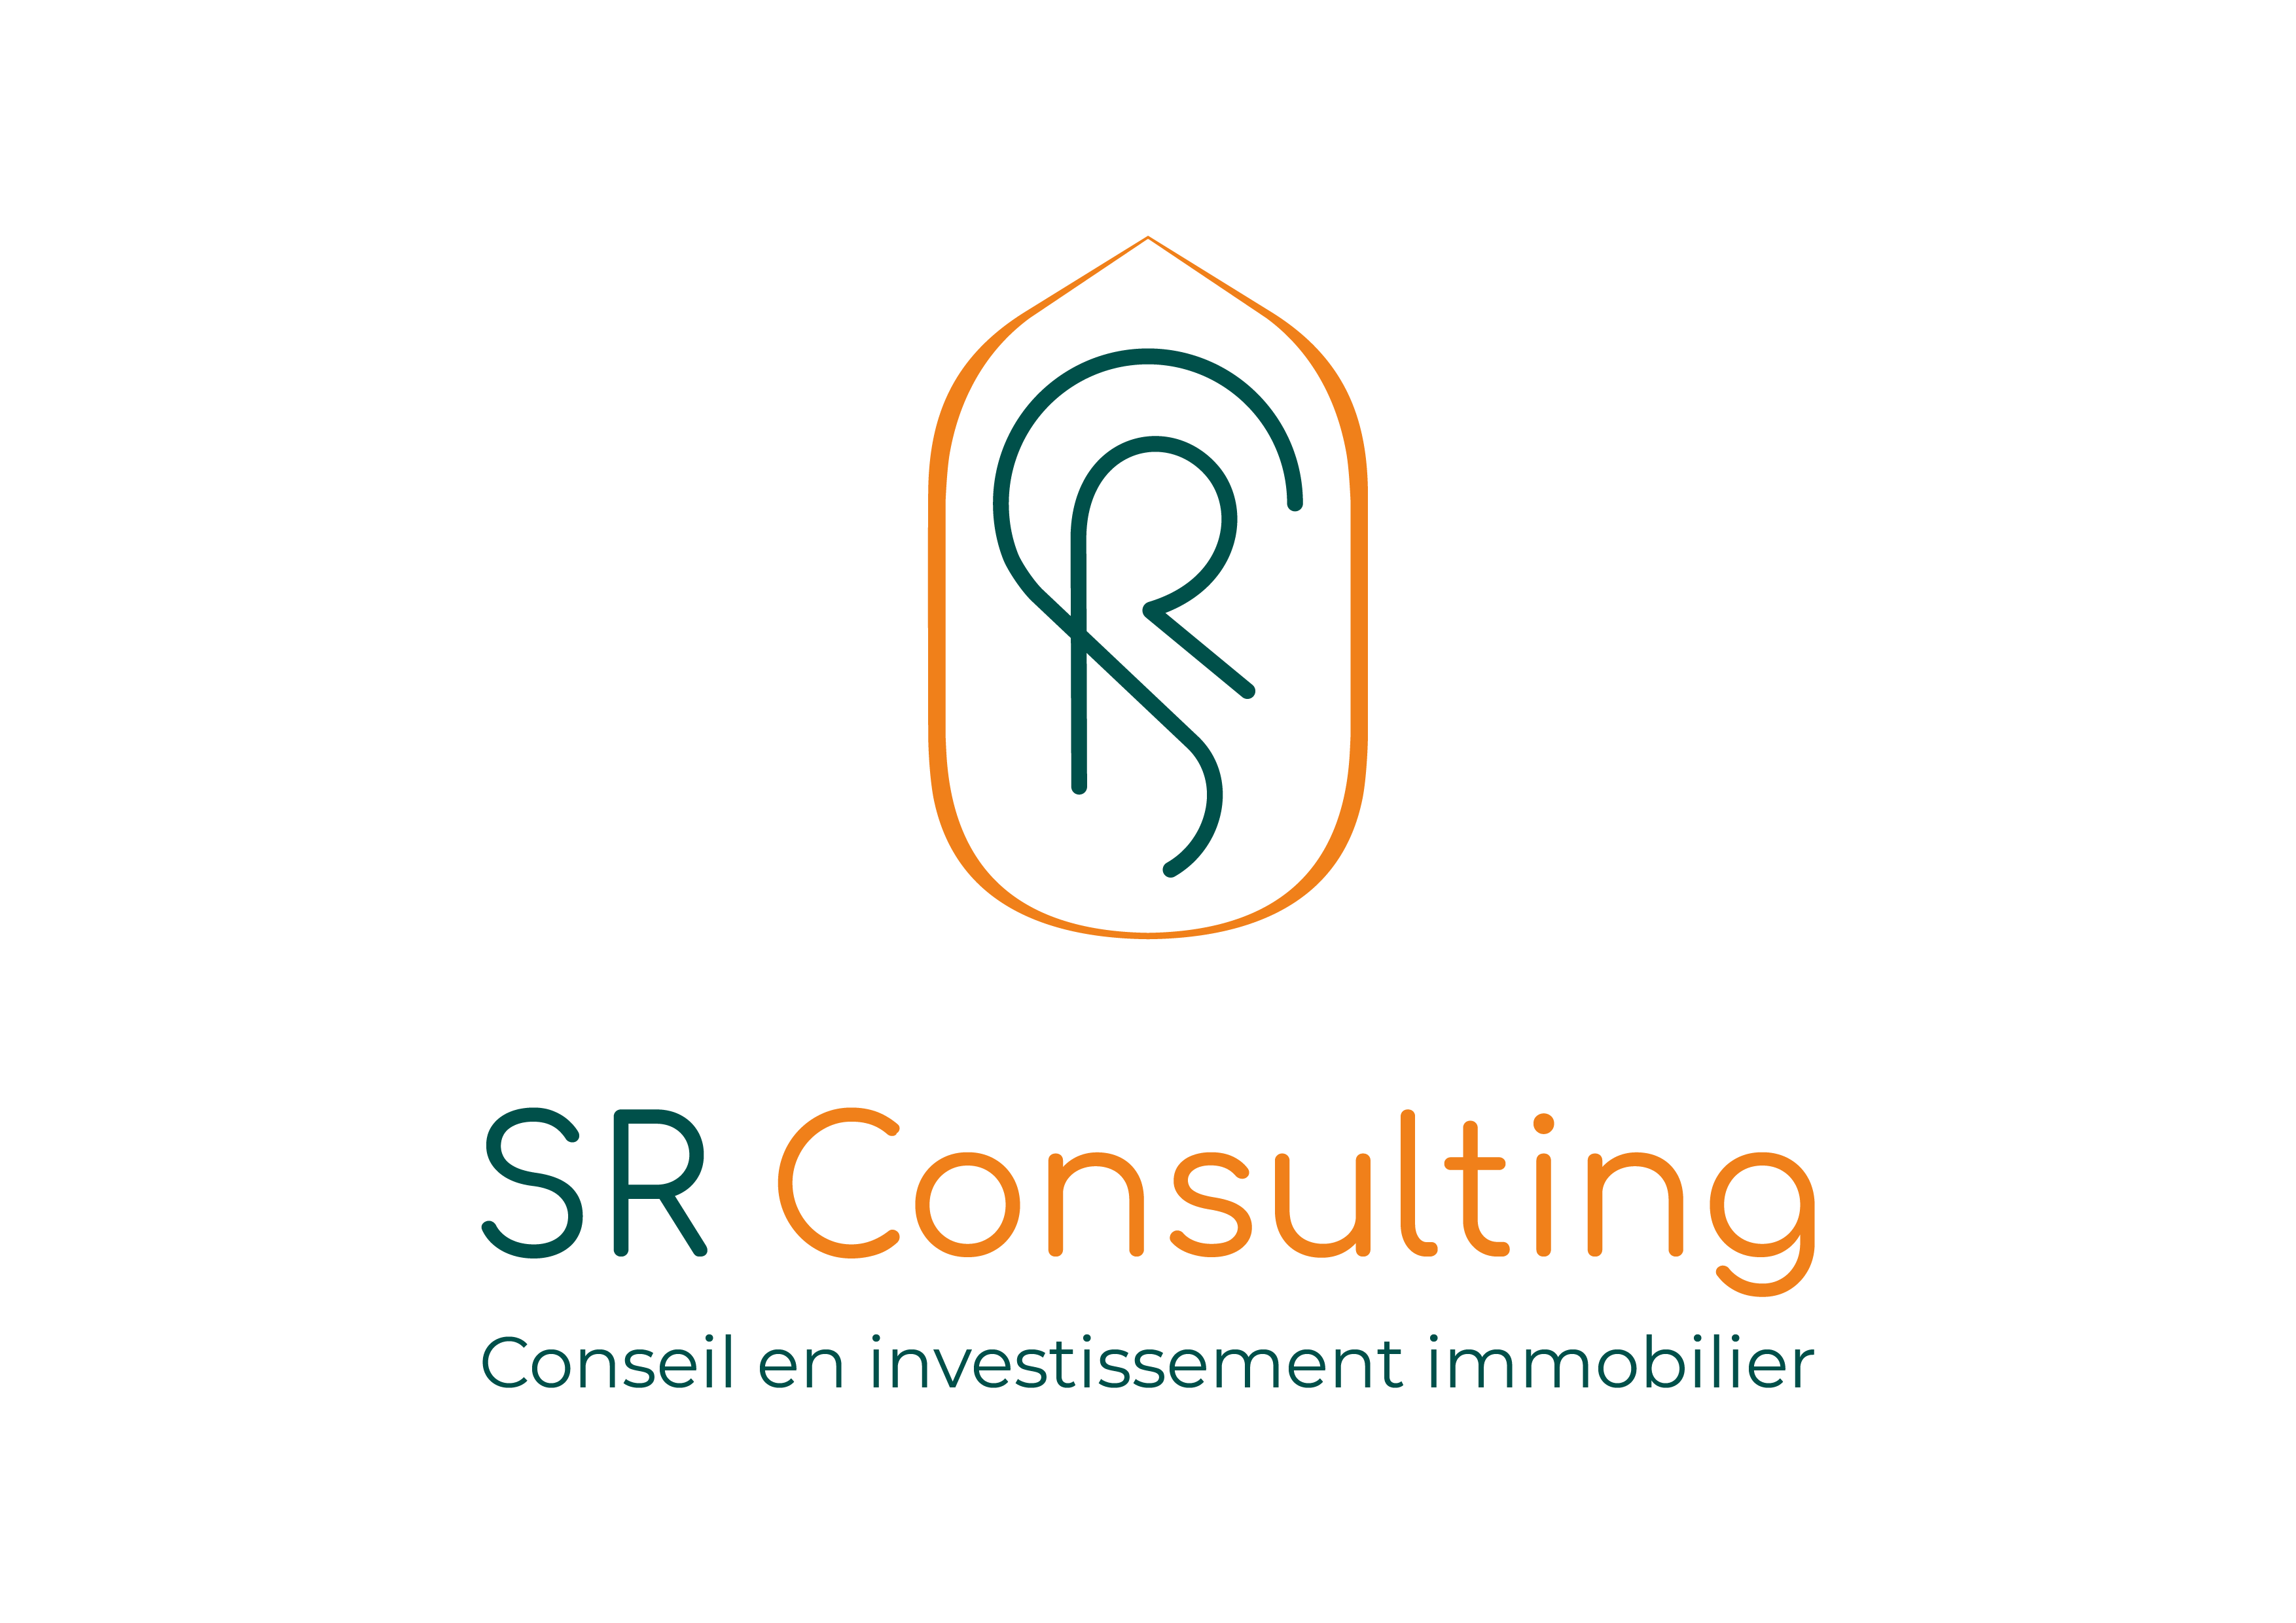 SR Consulting